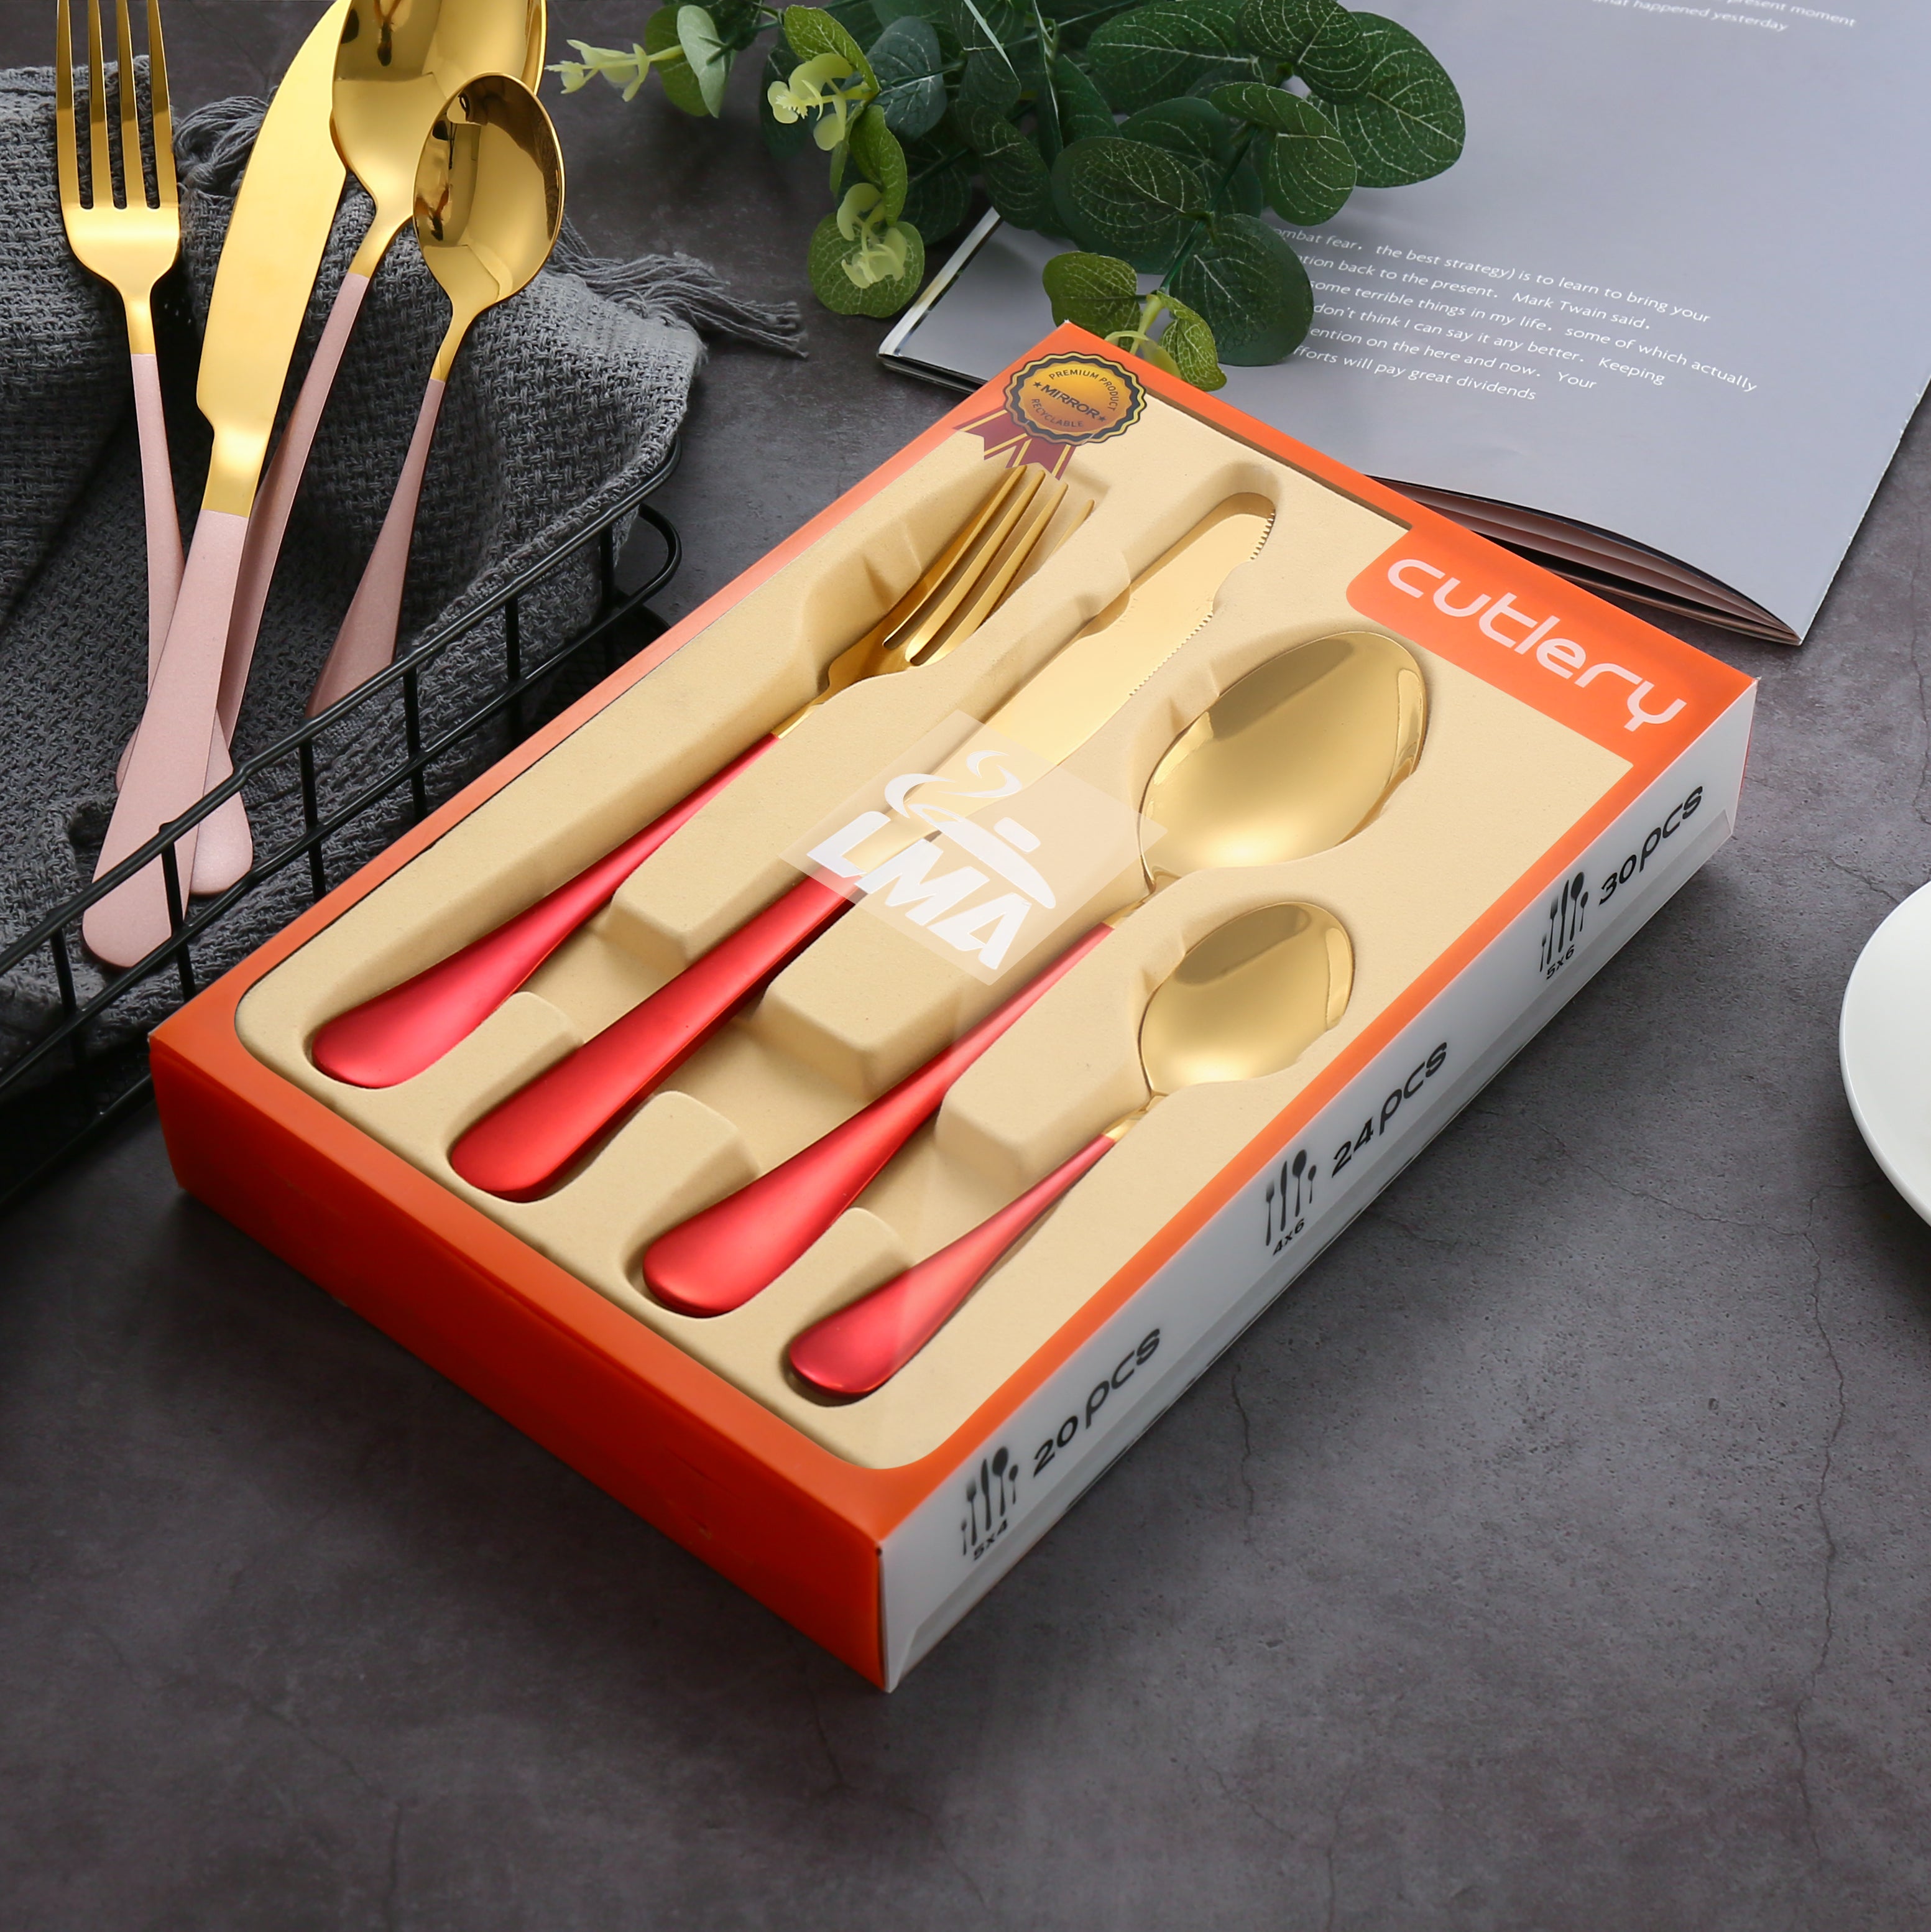 LMA 24 Piece Two-Tone Cutlery Dinner Set in PVC Pack